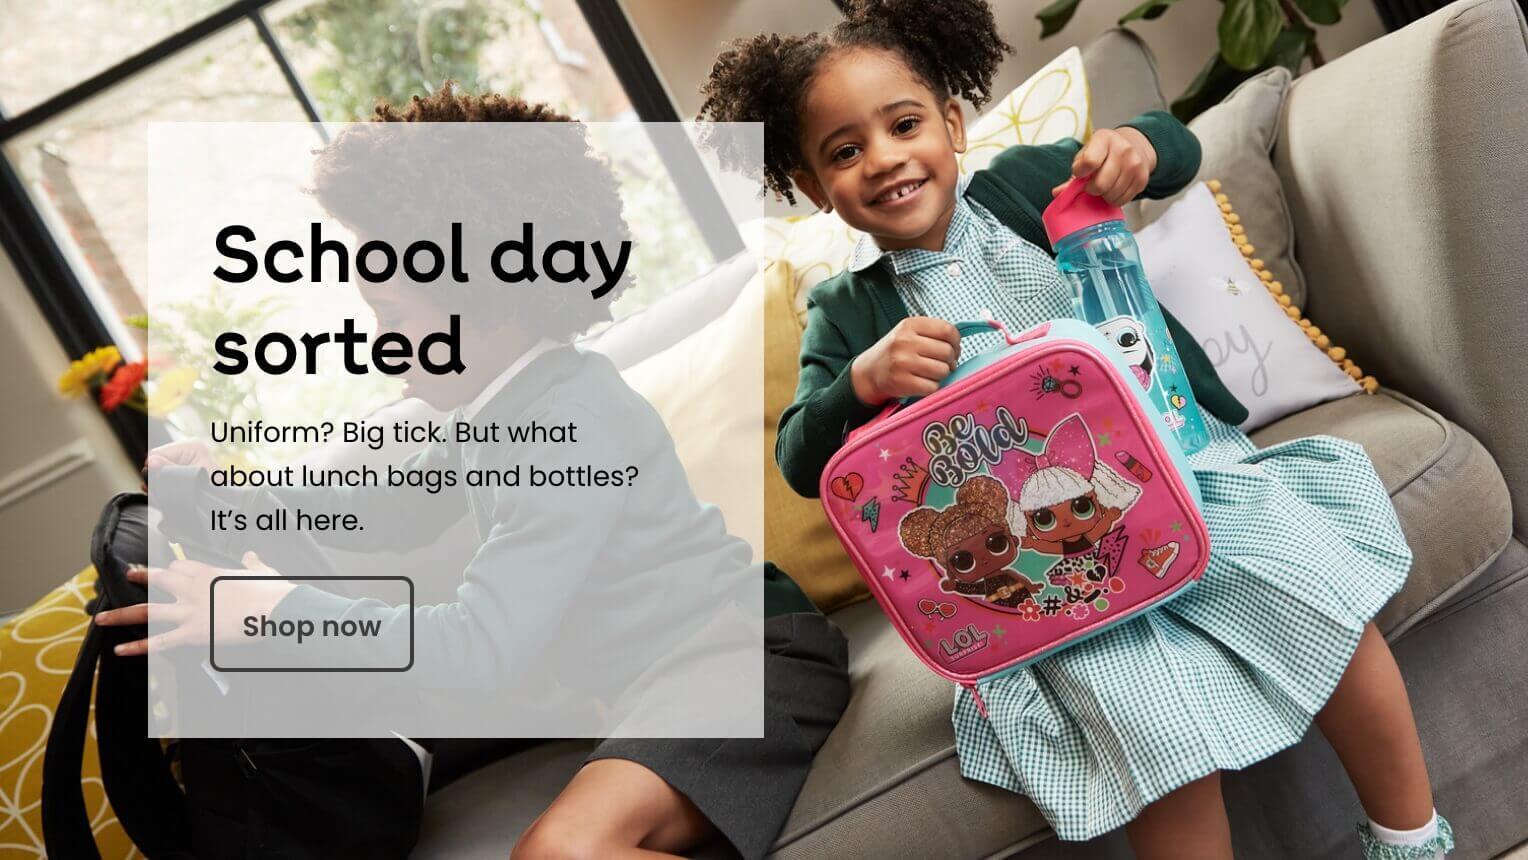 School day sorted. Uniform? Big tick. But what about lunch bags and bottles? It’s all here.